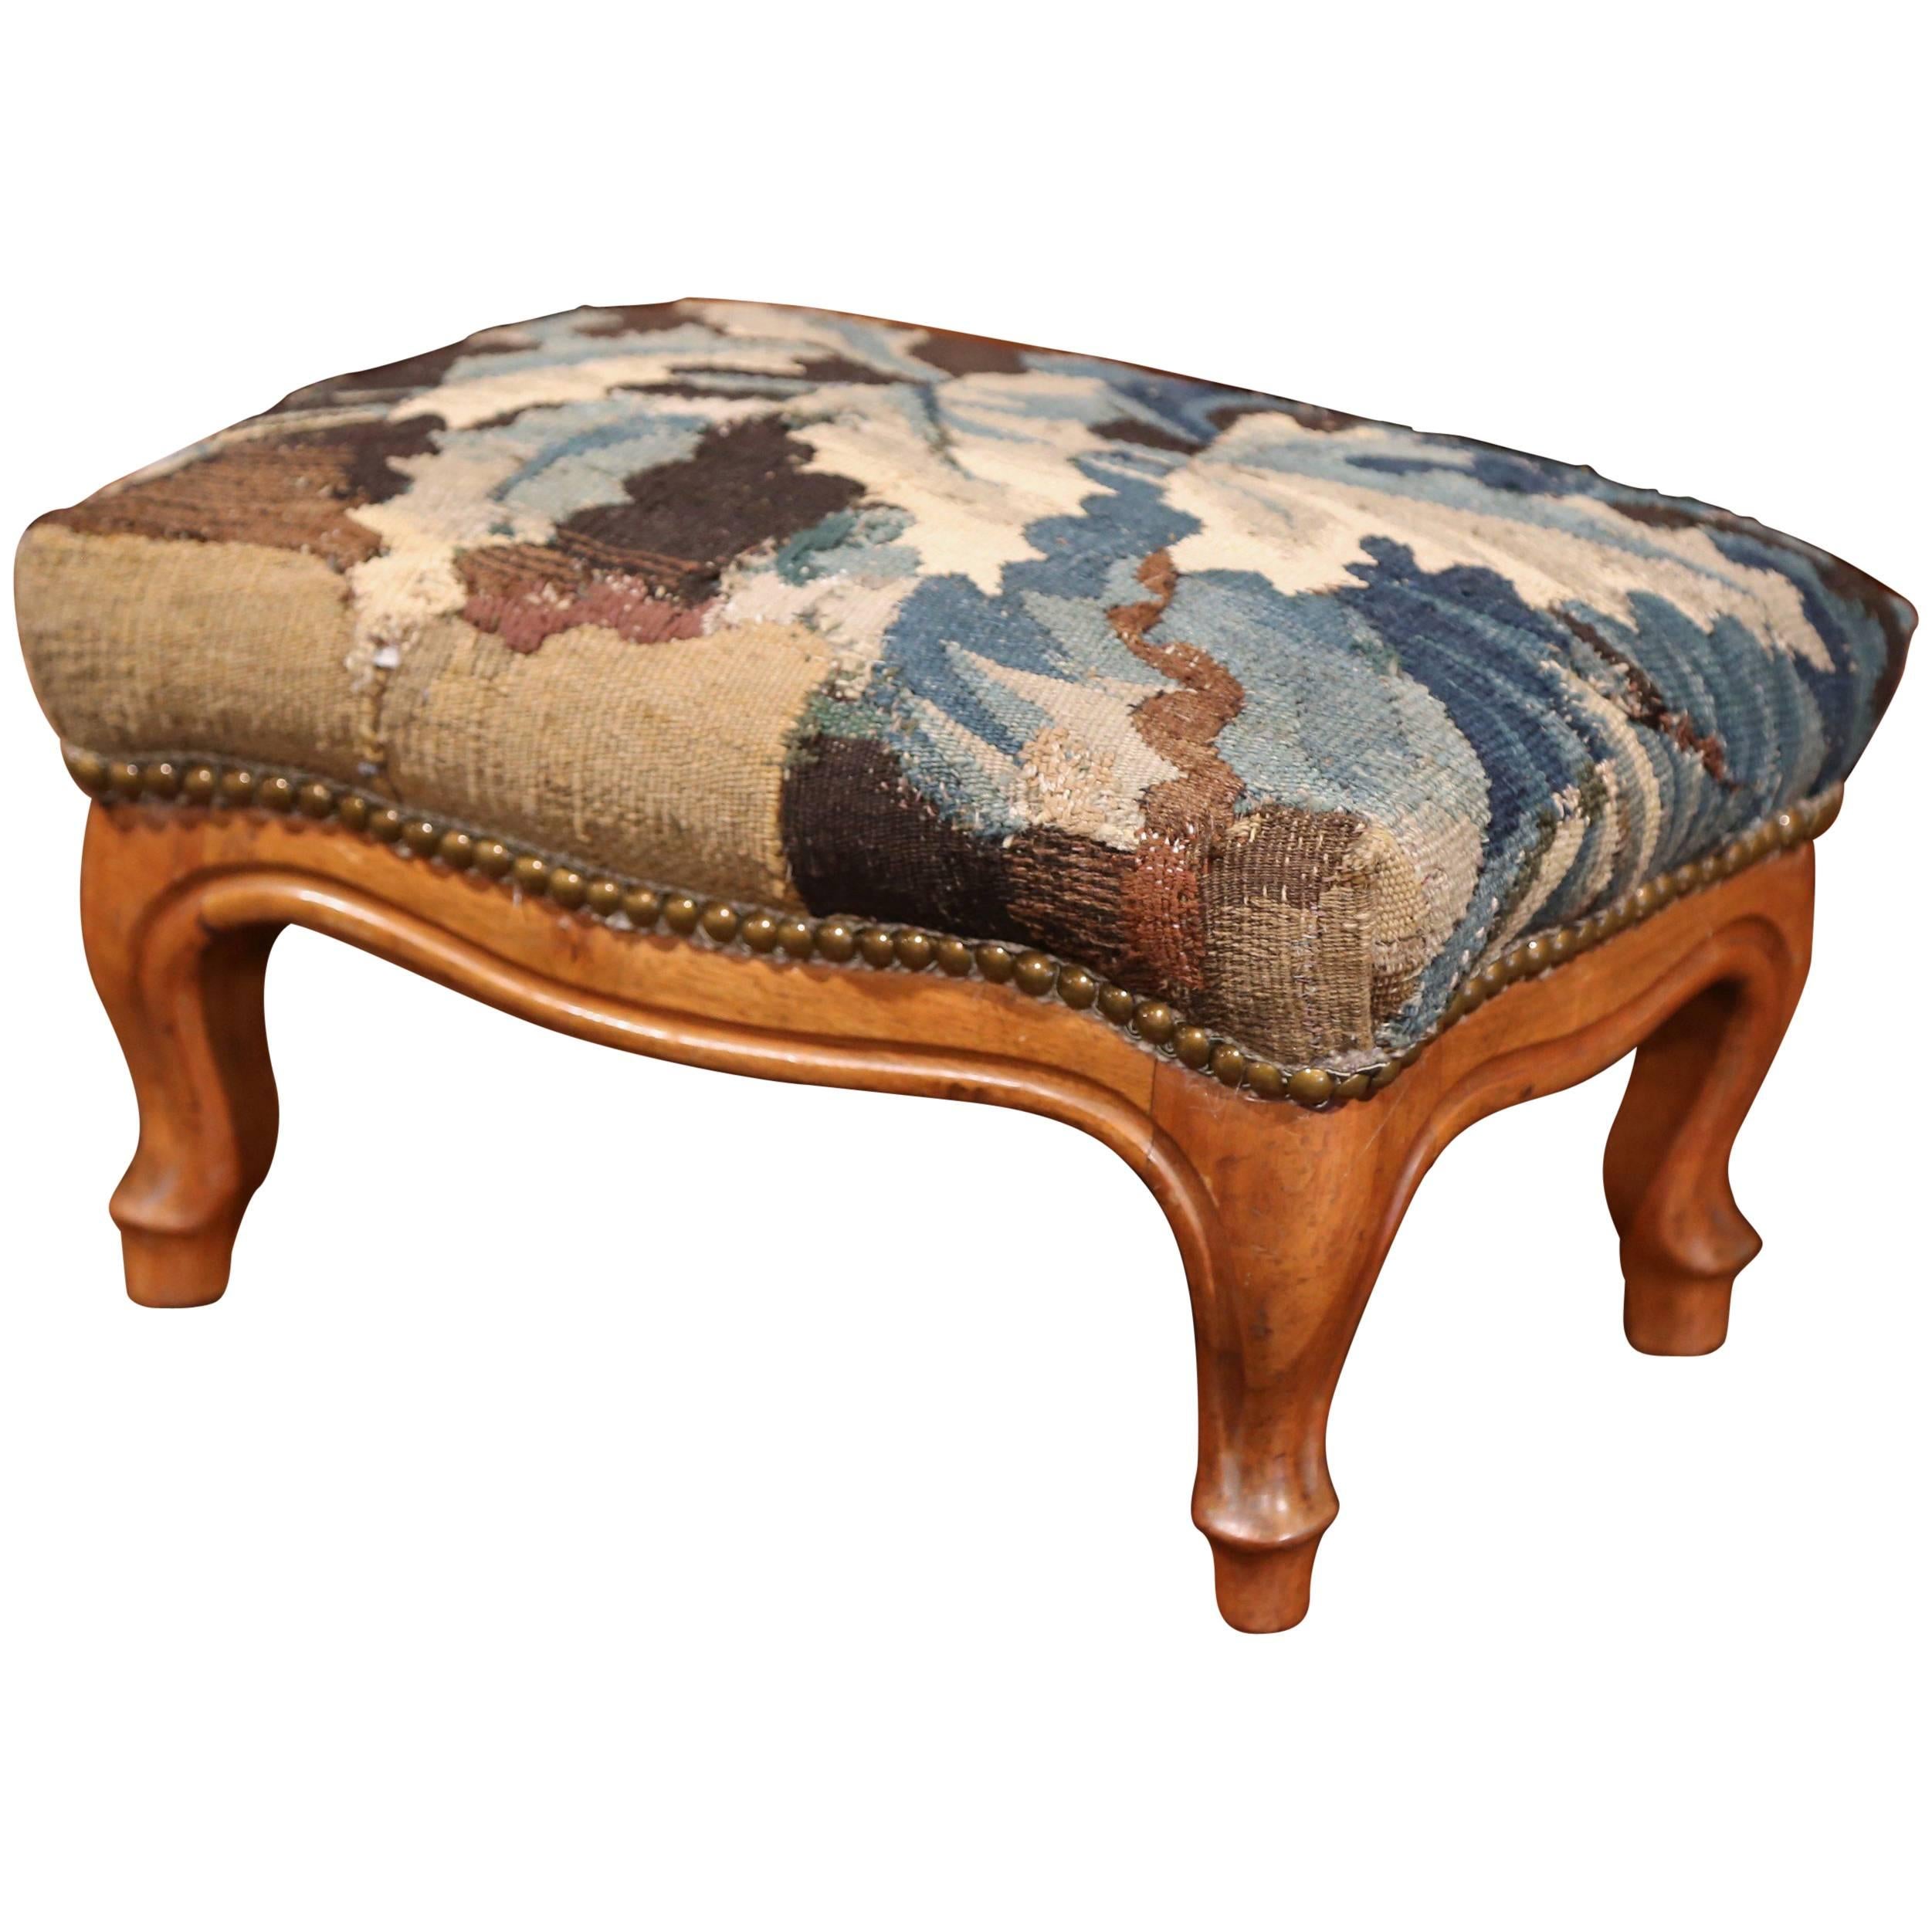 This elegant, antique footstool was crafted in Lyon, France, circa 1860. The carved, rectangular footrest has been reupholstered with old Aubusson verdure fragment in soft blue, beige, green and brown palette. The Louis XV stool is in excellent